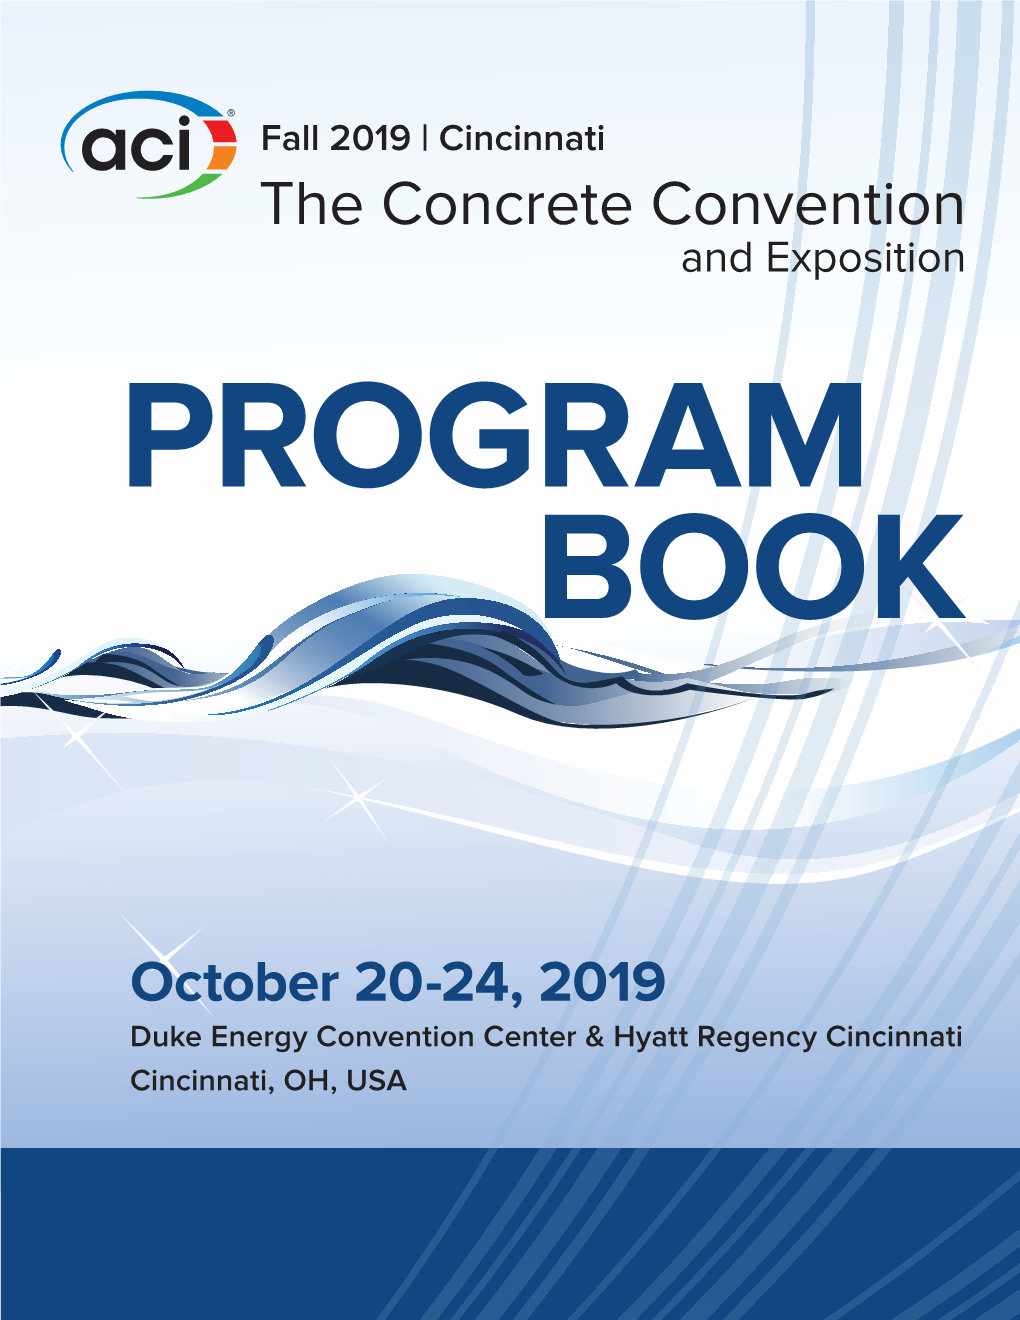 The Concrete Convention and Exposition PROGRAM BOOK